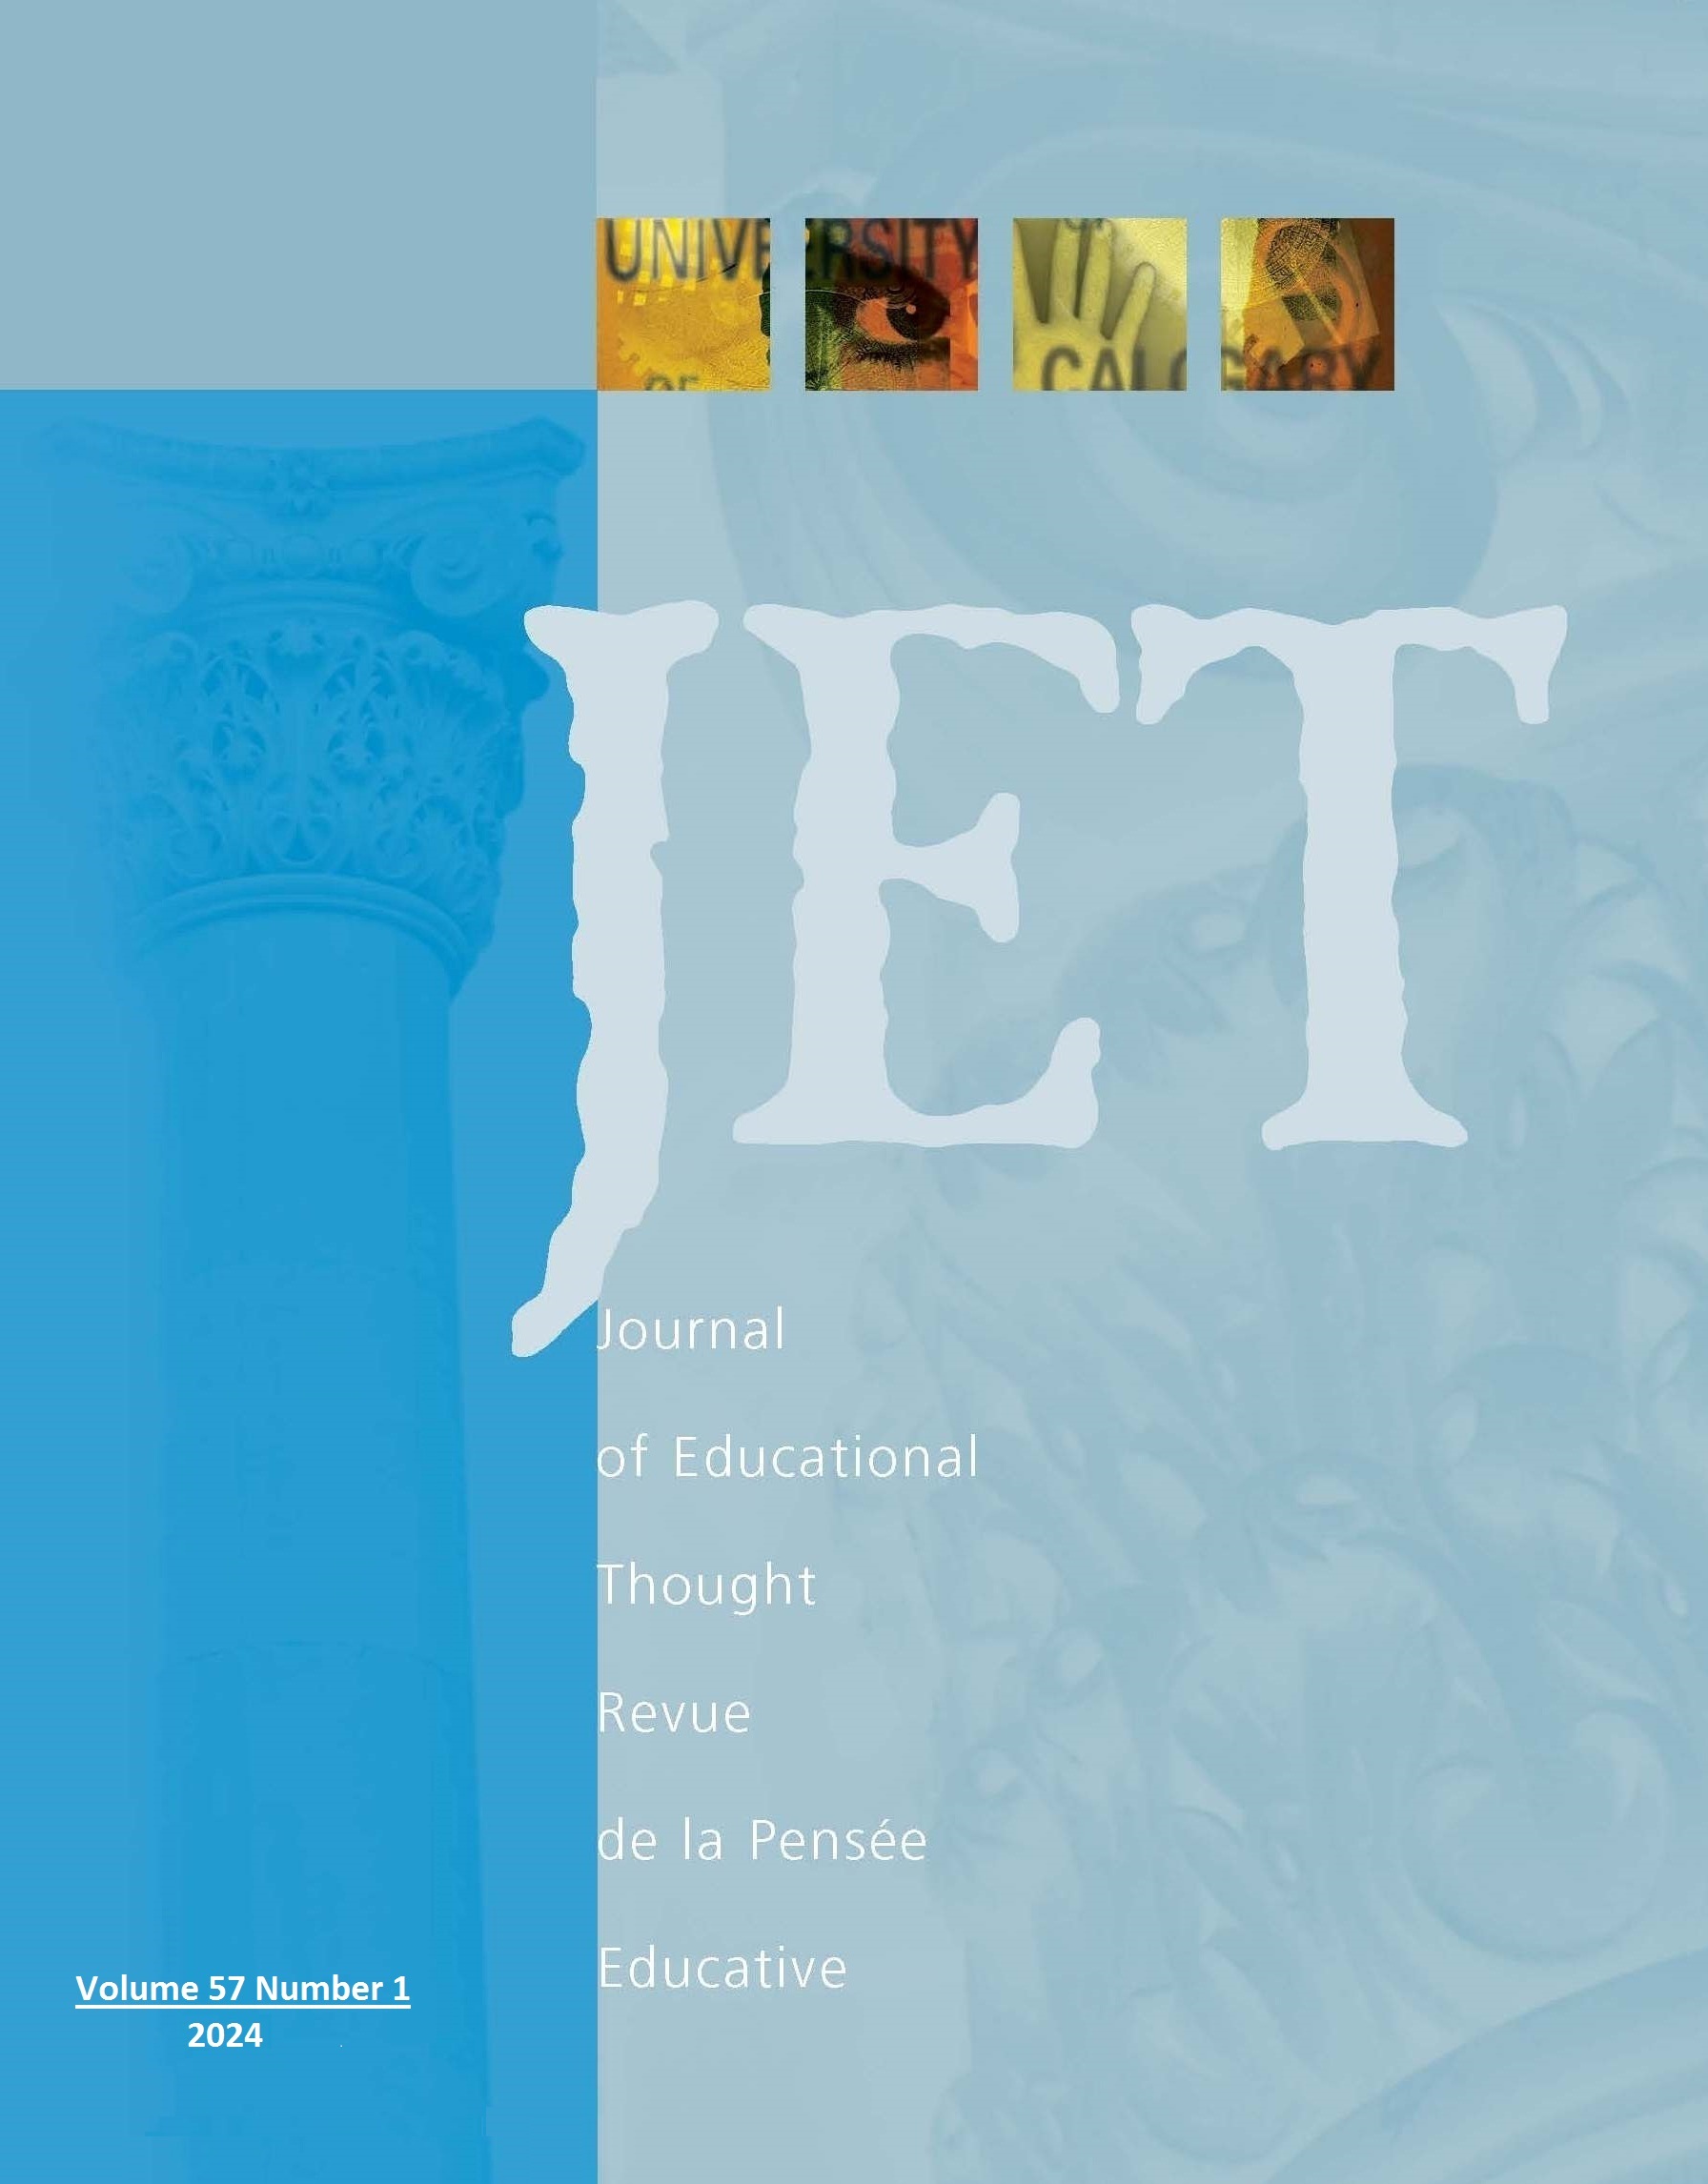 					View Vol. 57 No. 1 (2024): Journal of Educational Thought
				